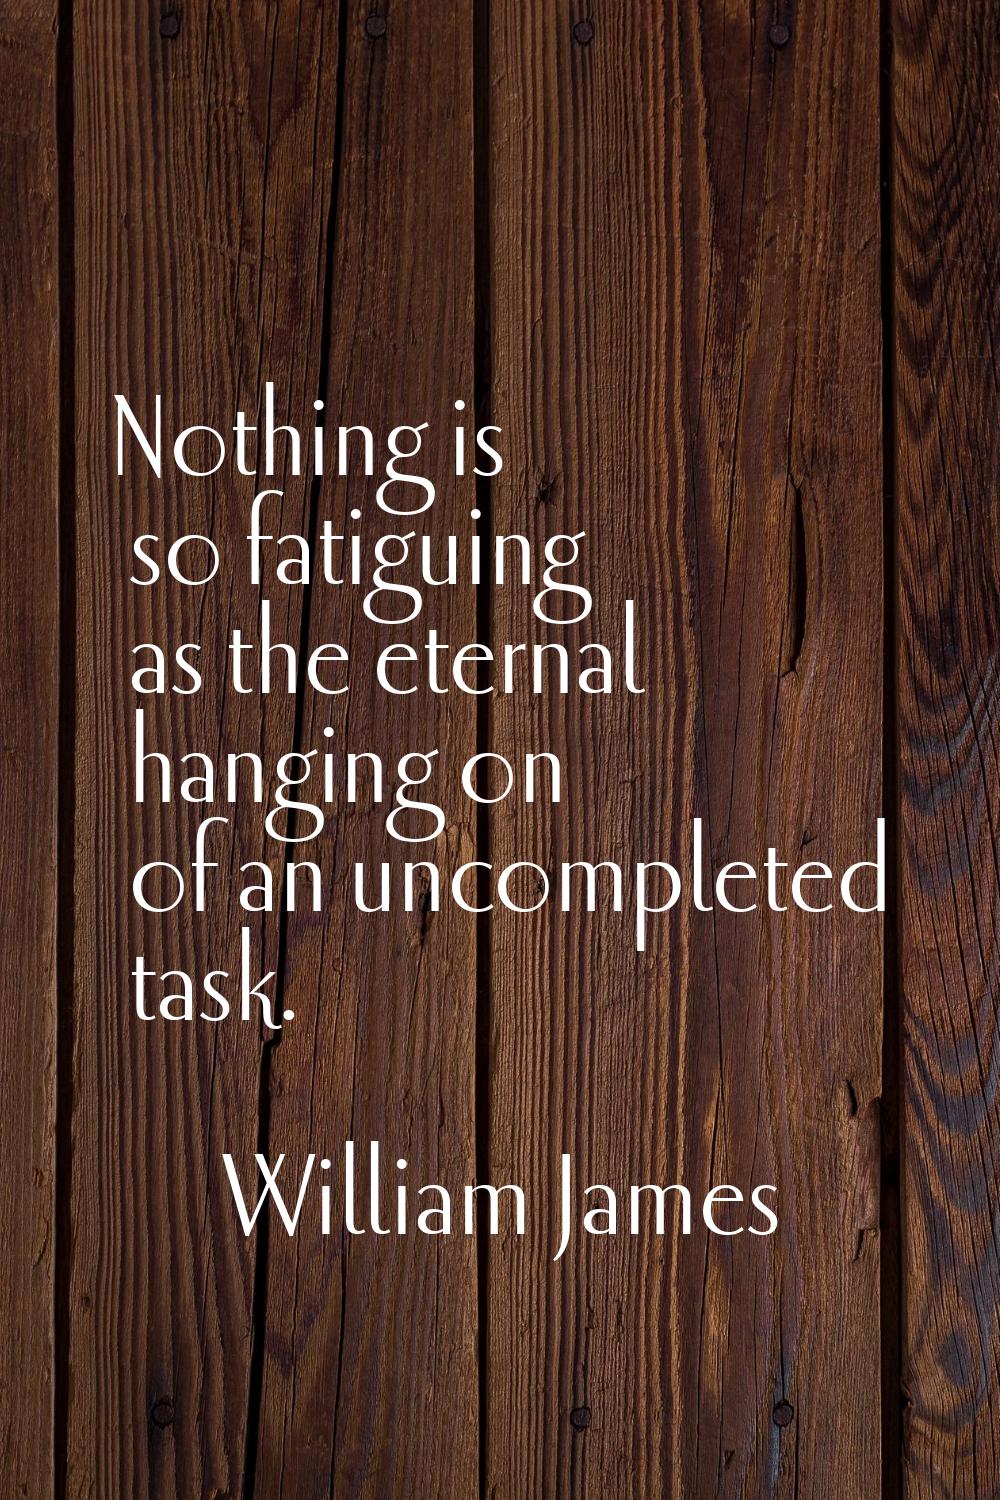 Nothing is so fatiguing as the eternal hanging on of an uncompleted task.